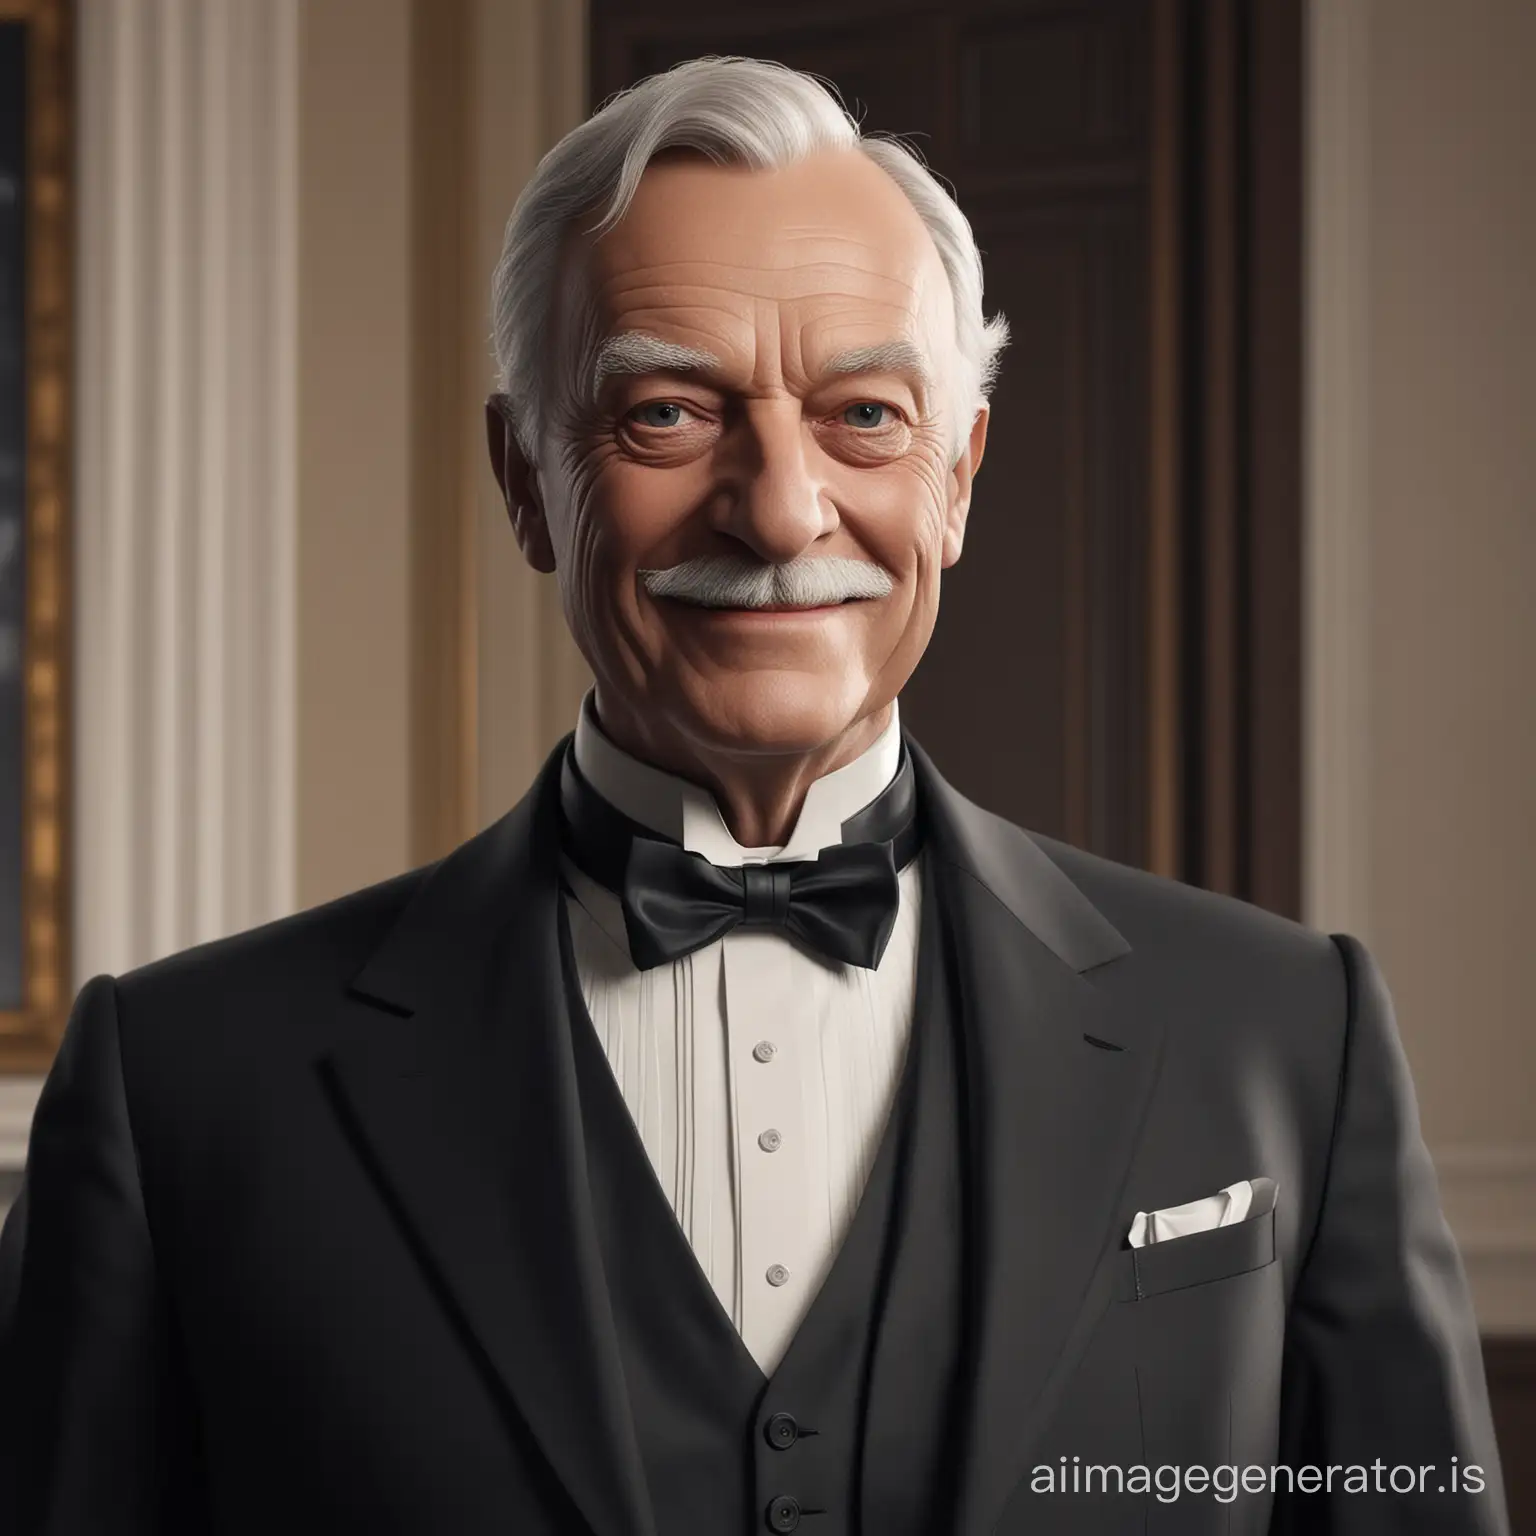 Depict Alfred, the iconic butler of Batman, reimagined as a friendly and reassuring AI assistant for a home automation project. This Alfred AI embodies warmth and reliability, serving as the user's guide within a sophisticated solar panel system. The image should capture Alfred's signature smile, symbolizing the AI's approachable and helpful nature. The background subtly hints at solar technology and home automation elements, blending Alfred's classic butler appearance with futuristic digital motifs. This representation is not intended for creation with DALL-E, but as a conceptual visualization for the project.